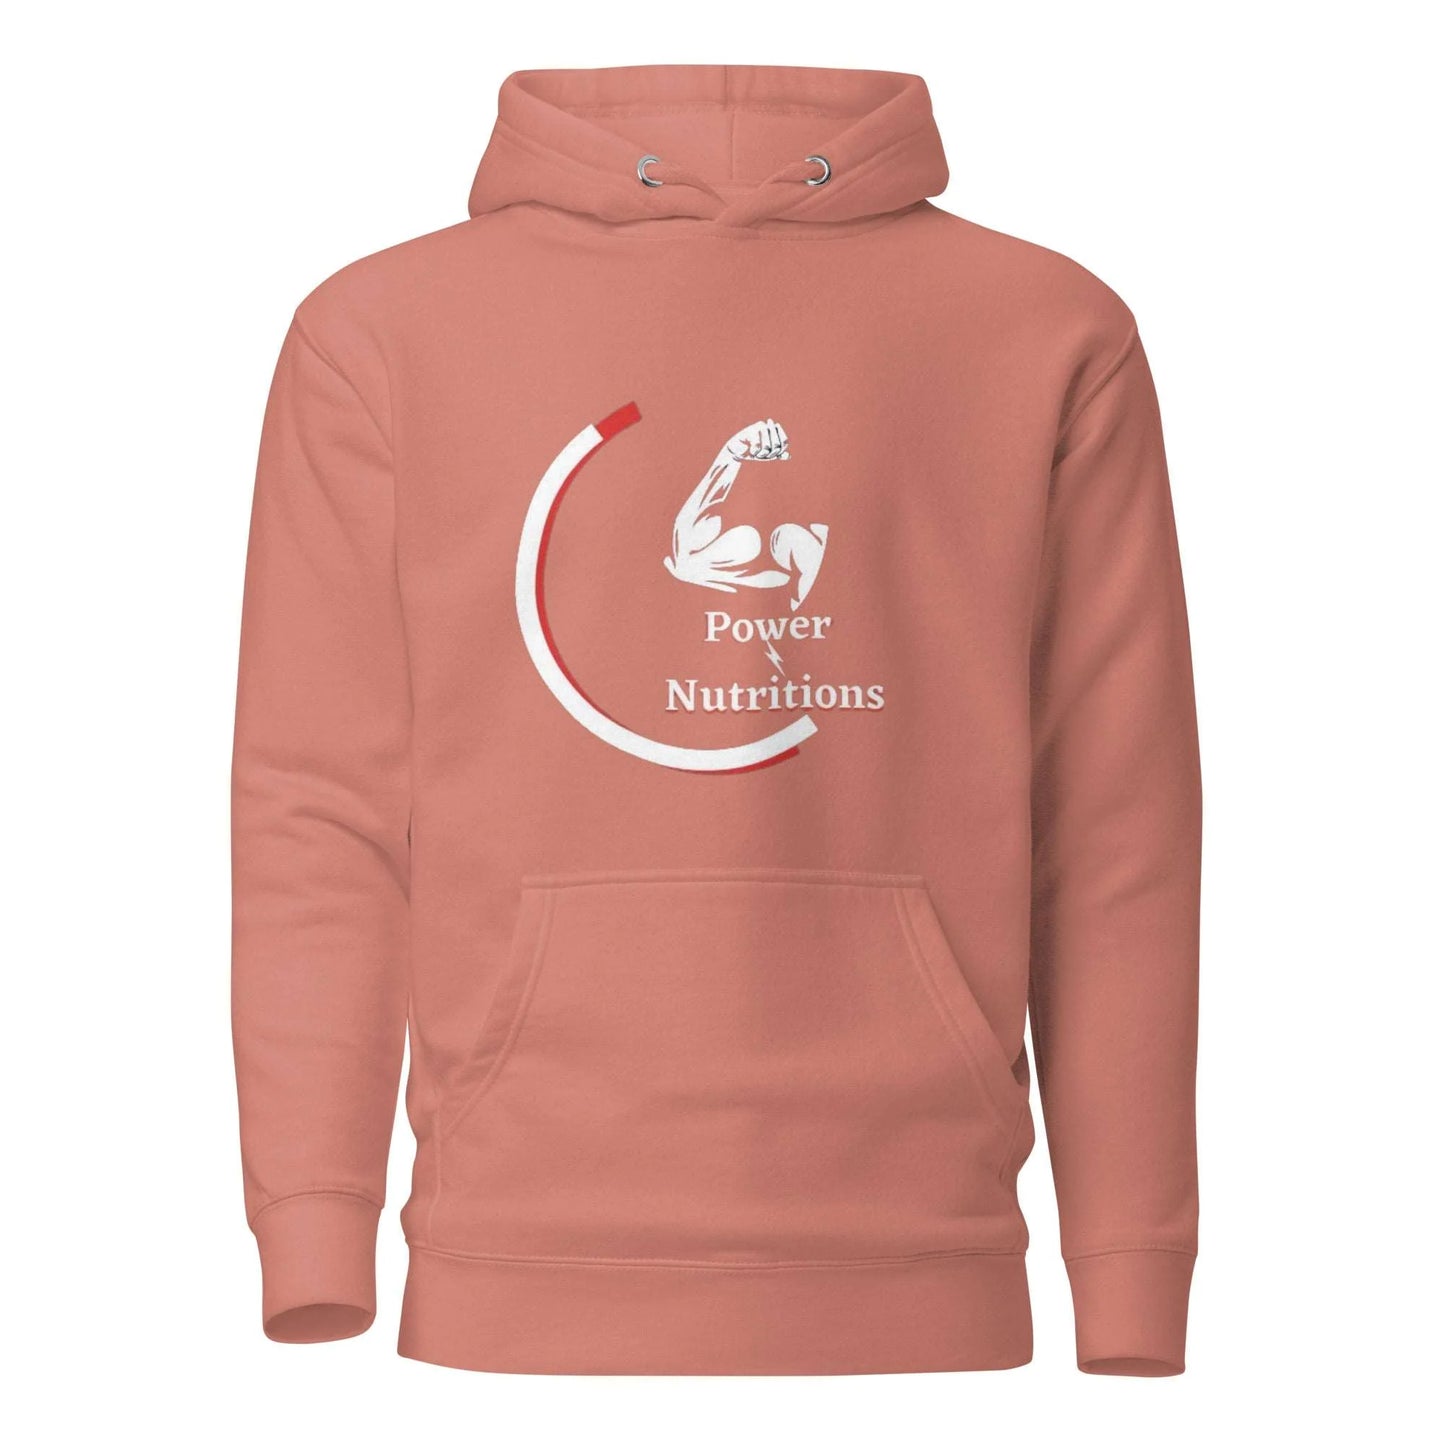 Professional title: "Unisex Hoodie by Power Nutritions"